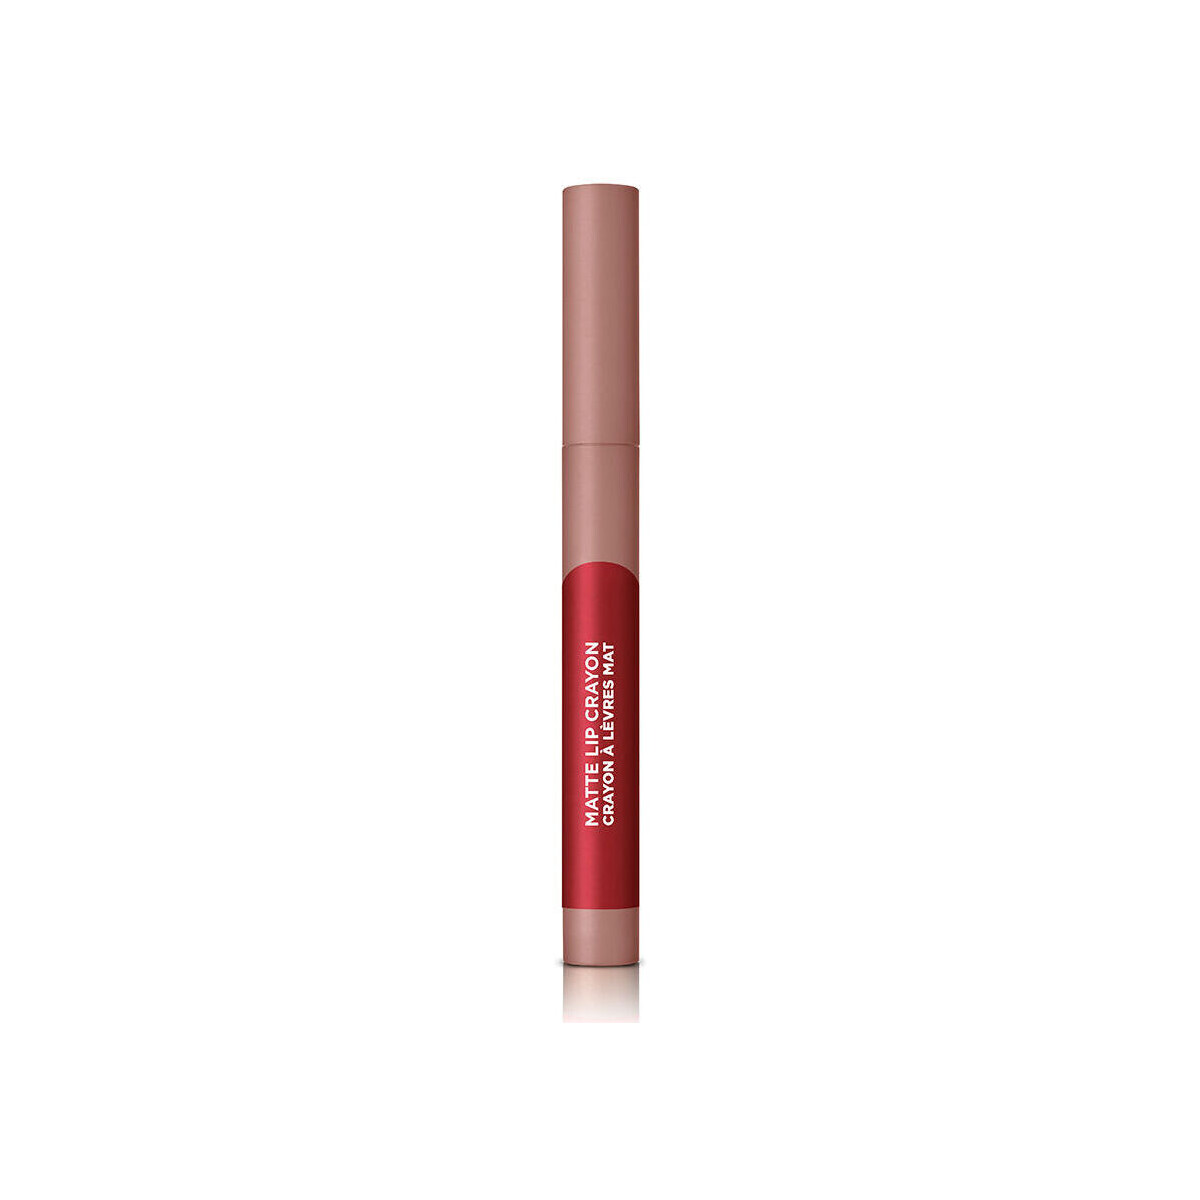 Bellezza Donna Rossetti L'oréal Infallible Matte Lip Crayon 113-brulee Everyday 